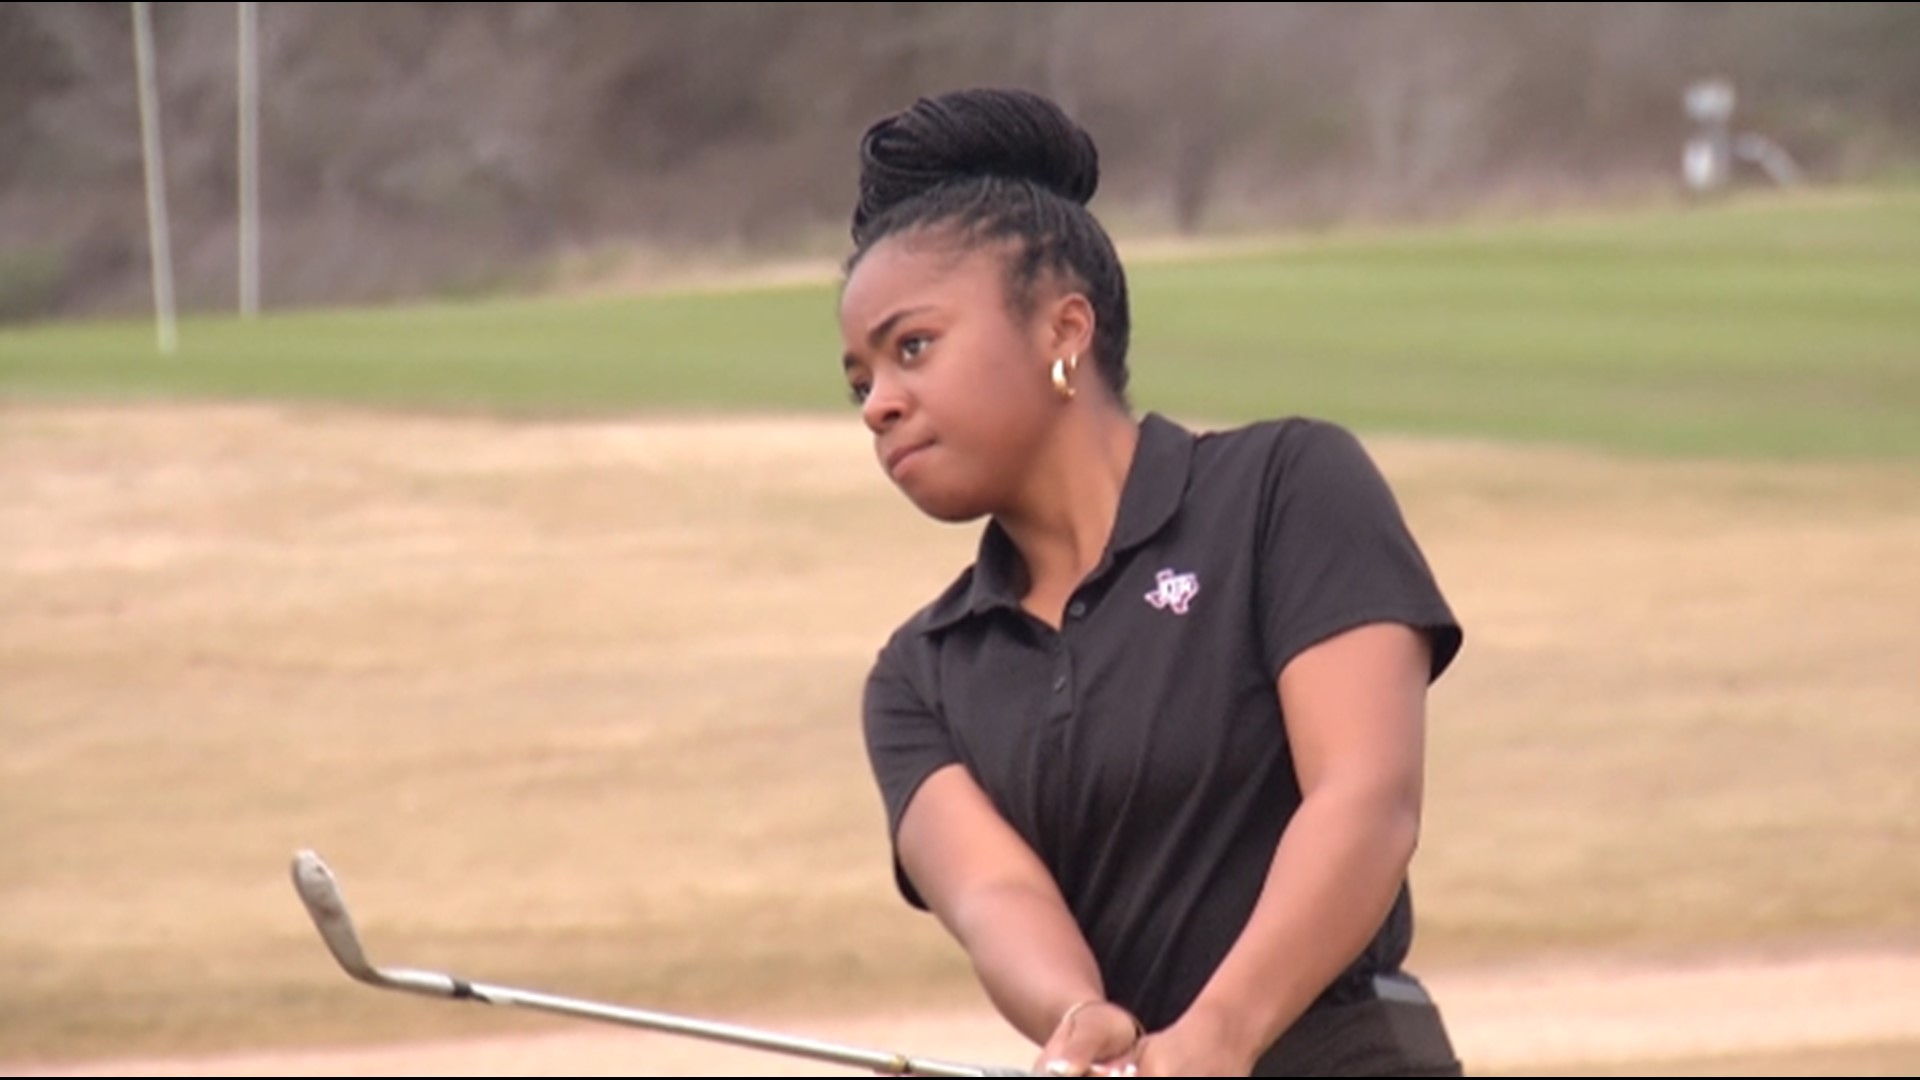 The A&M Women's Golf program began in 1975, but only a few years ago, Zoe Slaughter became the first African-American to join the team.